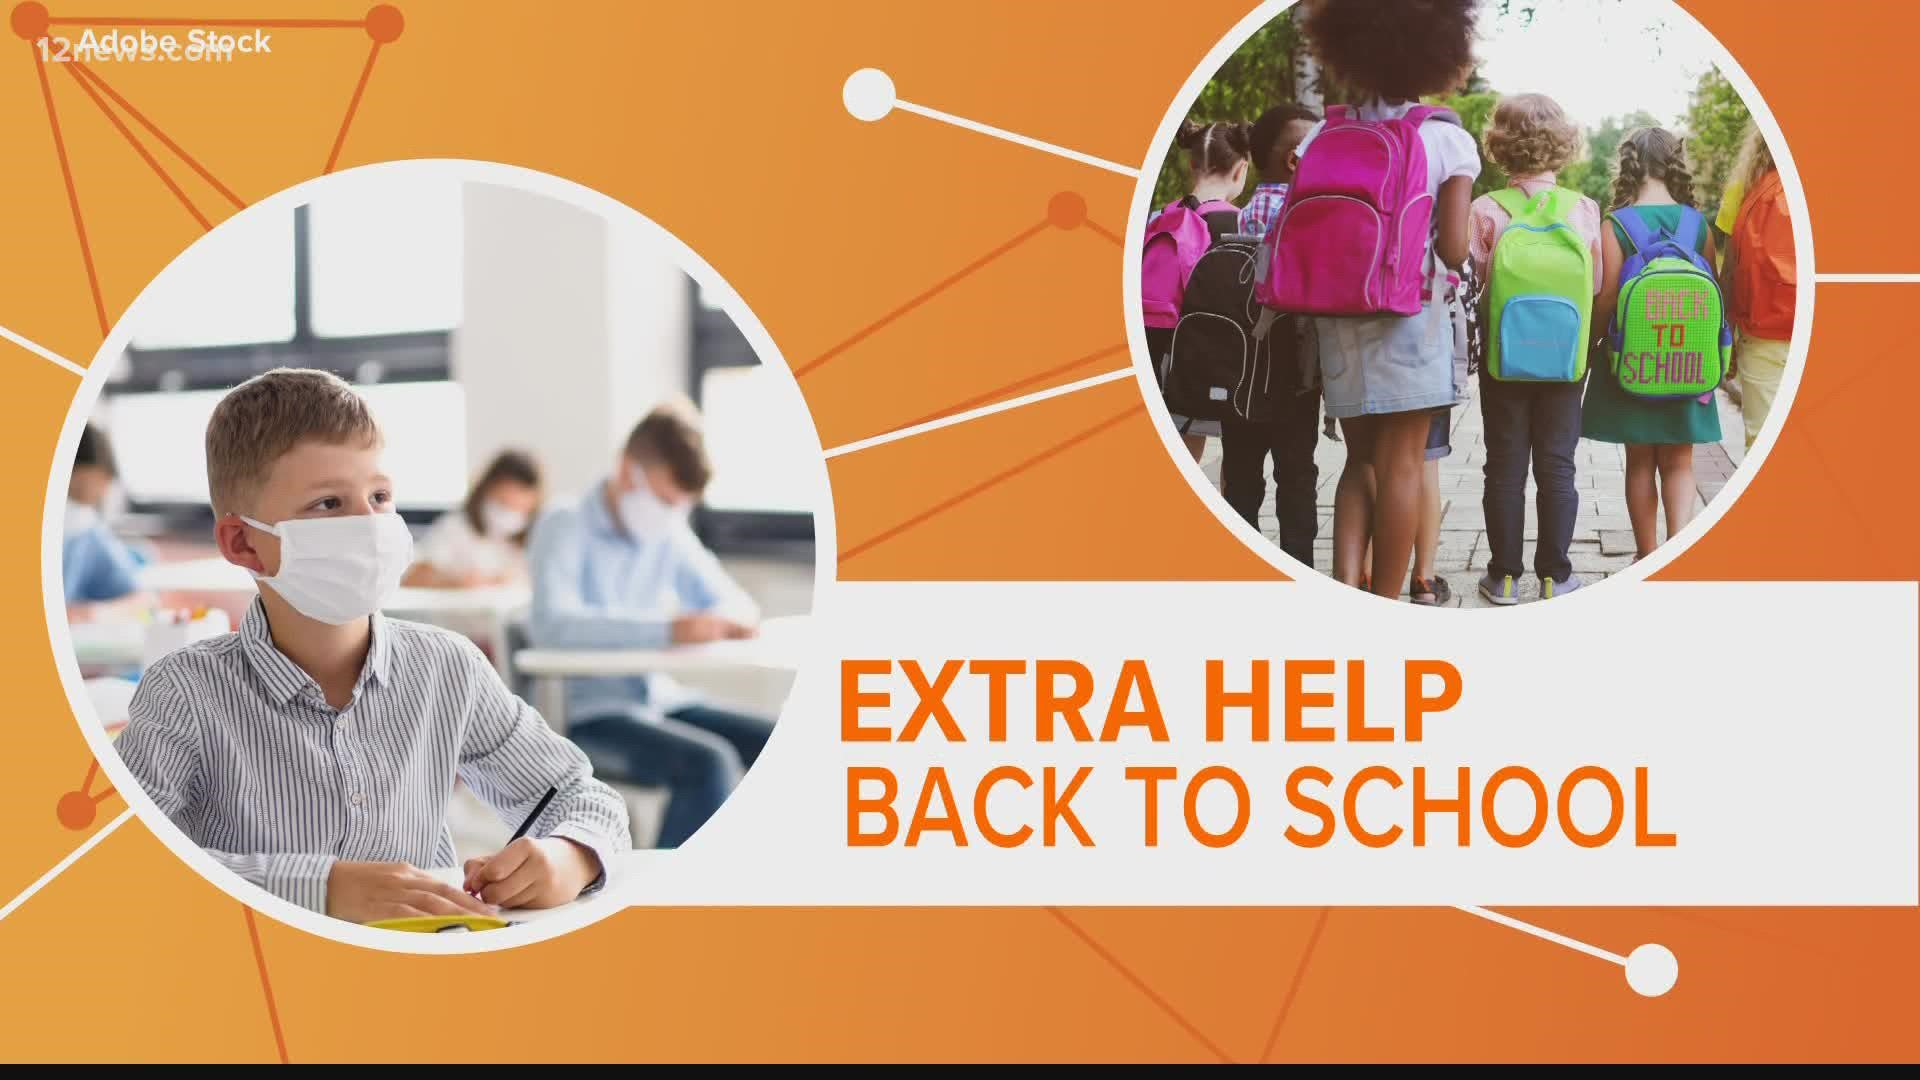 Parents can give structure, daily routines, and organization to students who may be struggling in the 2021-22 school year.